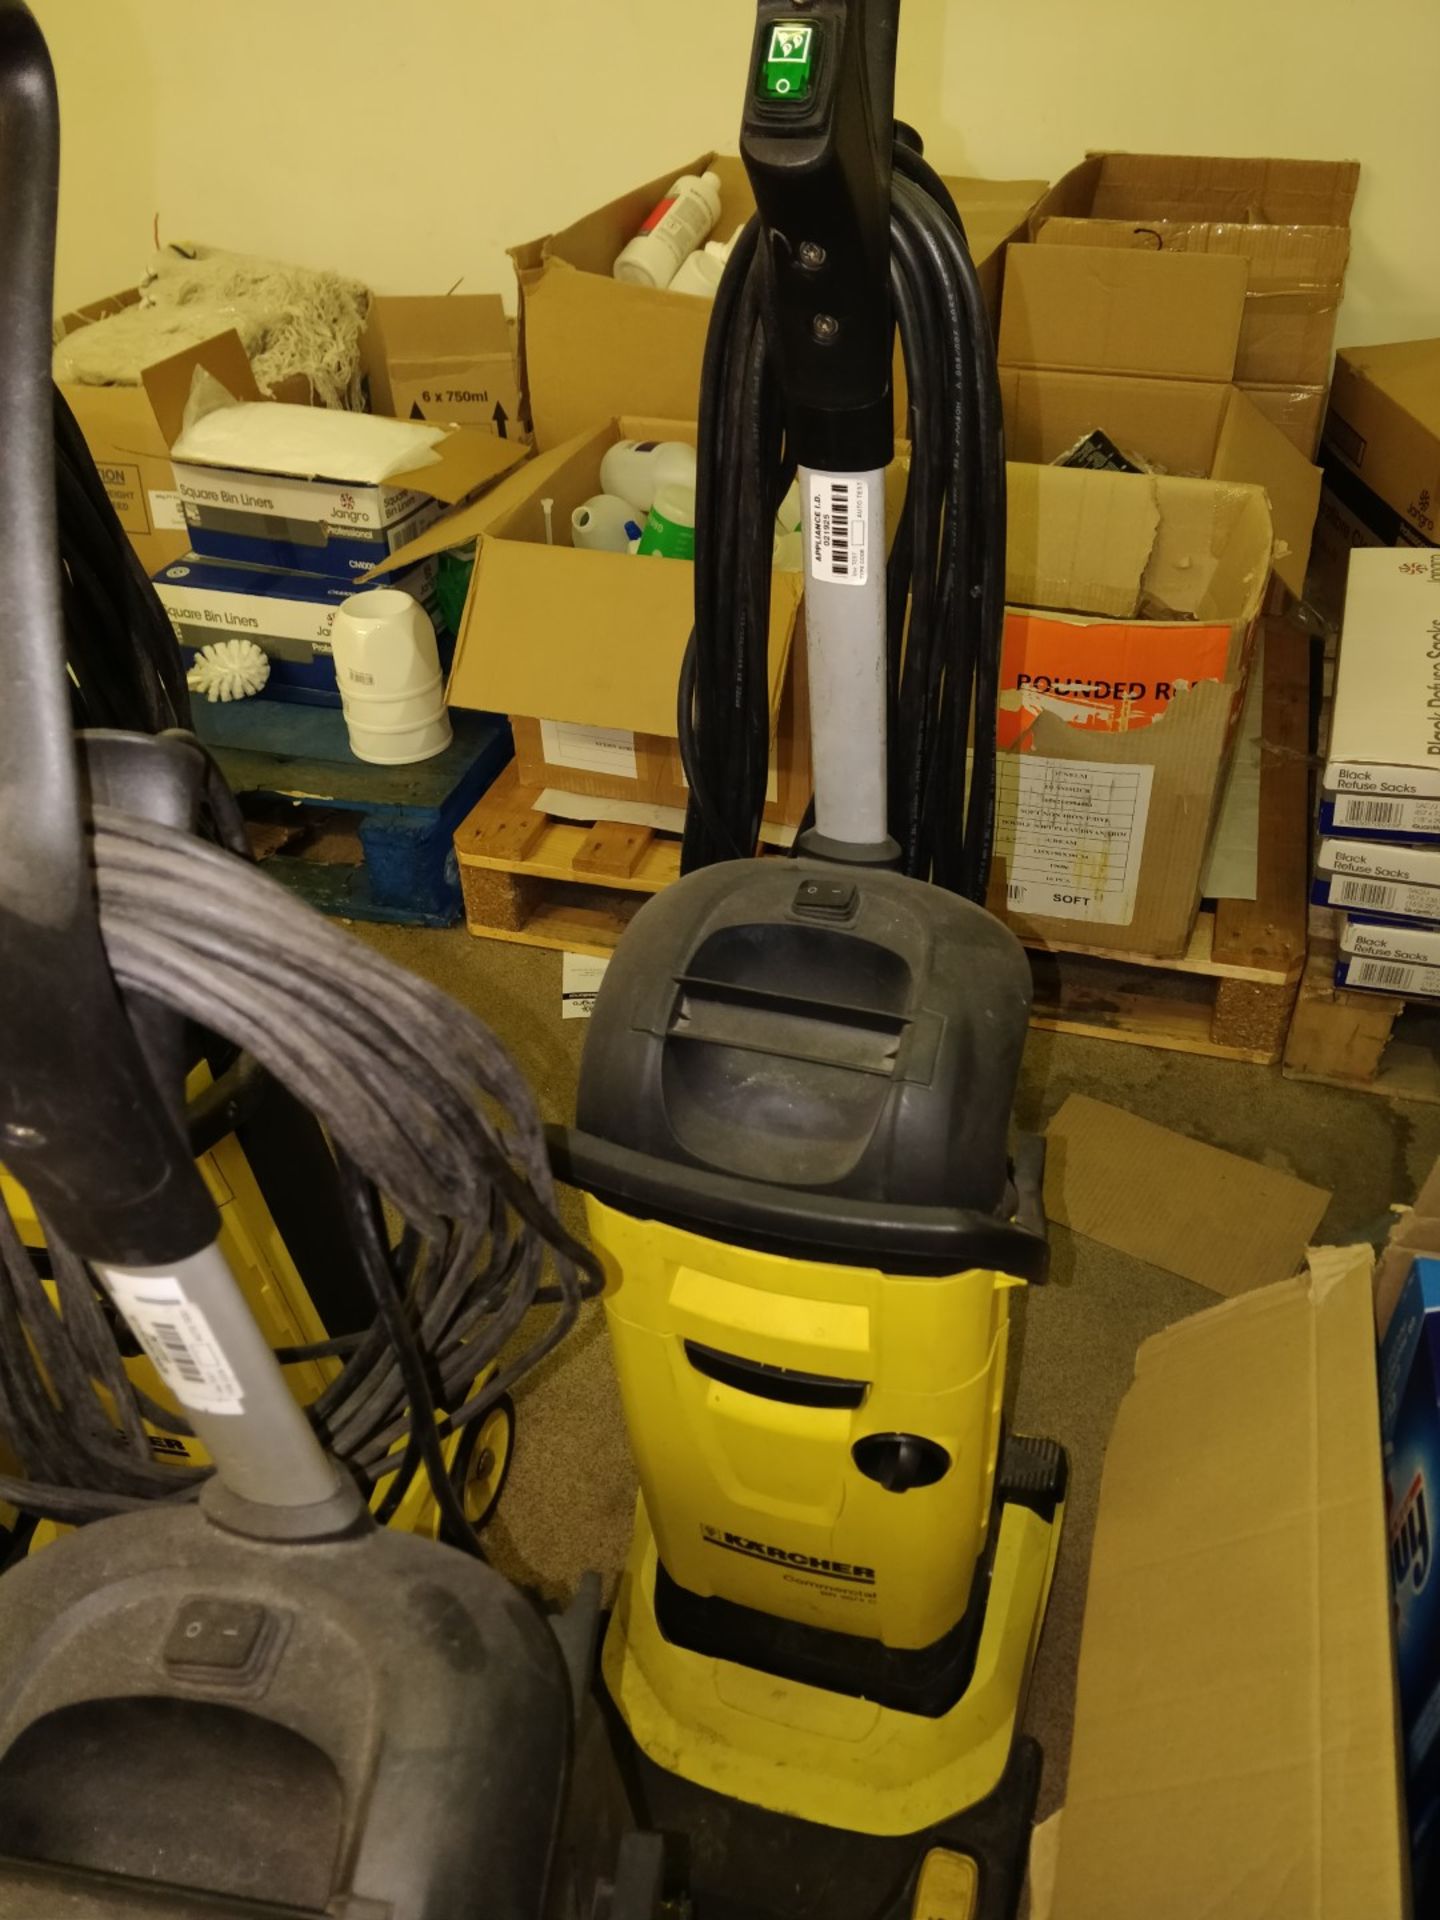 1 x Karcher BR 30/4 C Scrubber Dryer - Mains Powered - Approx RRP £900 - Ref B2 CL409 - Location: - Image 3 of 3